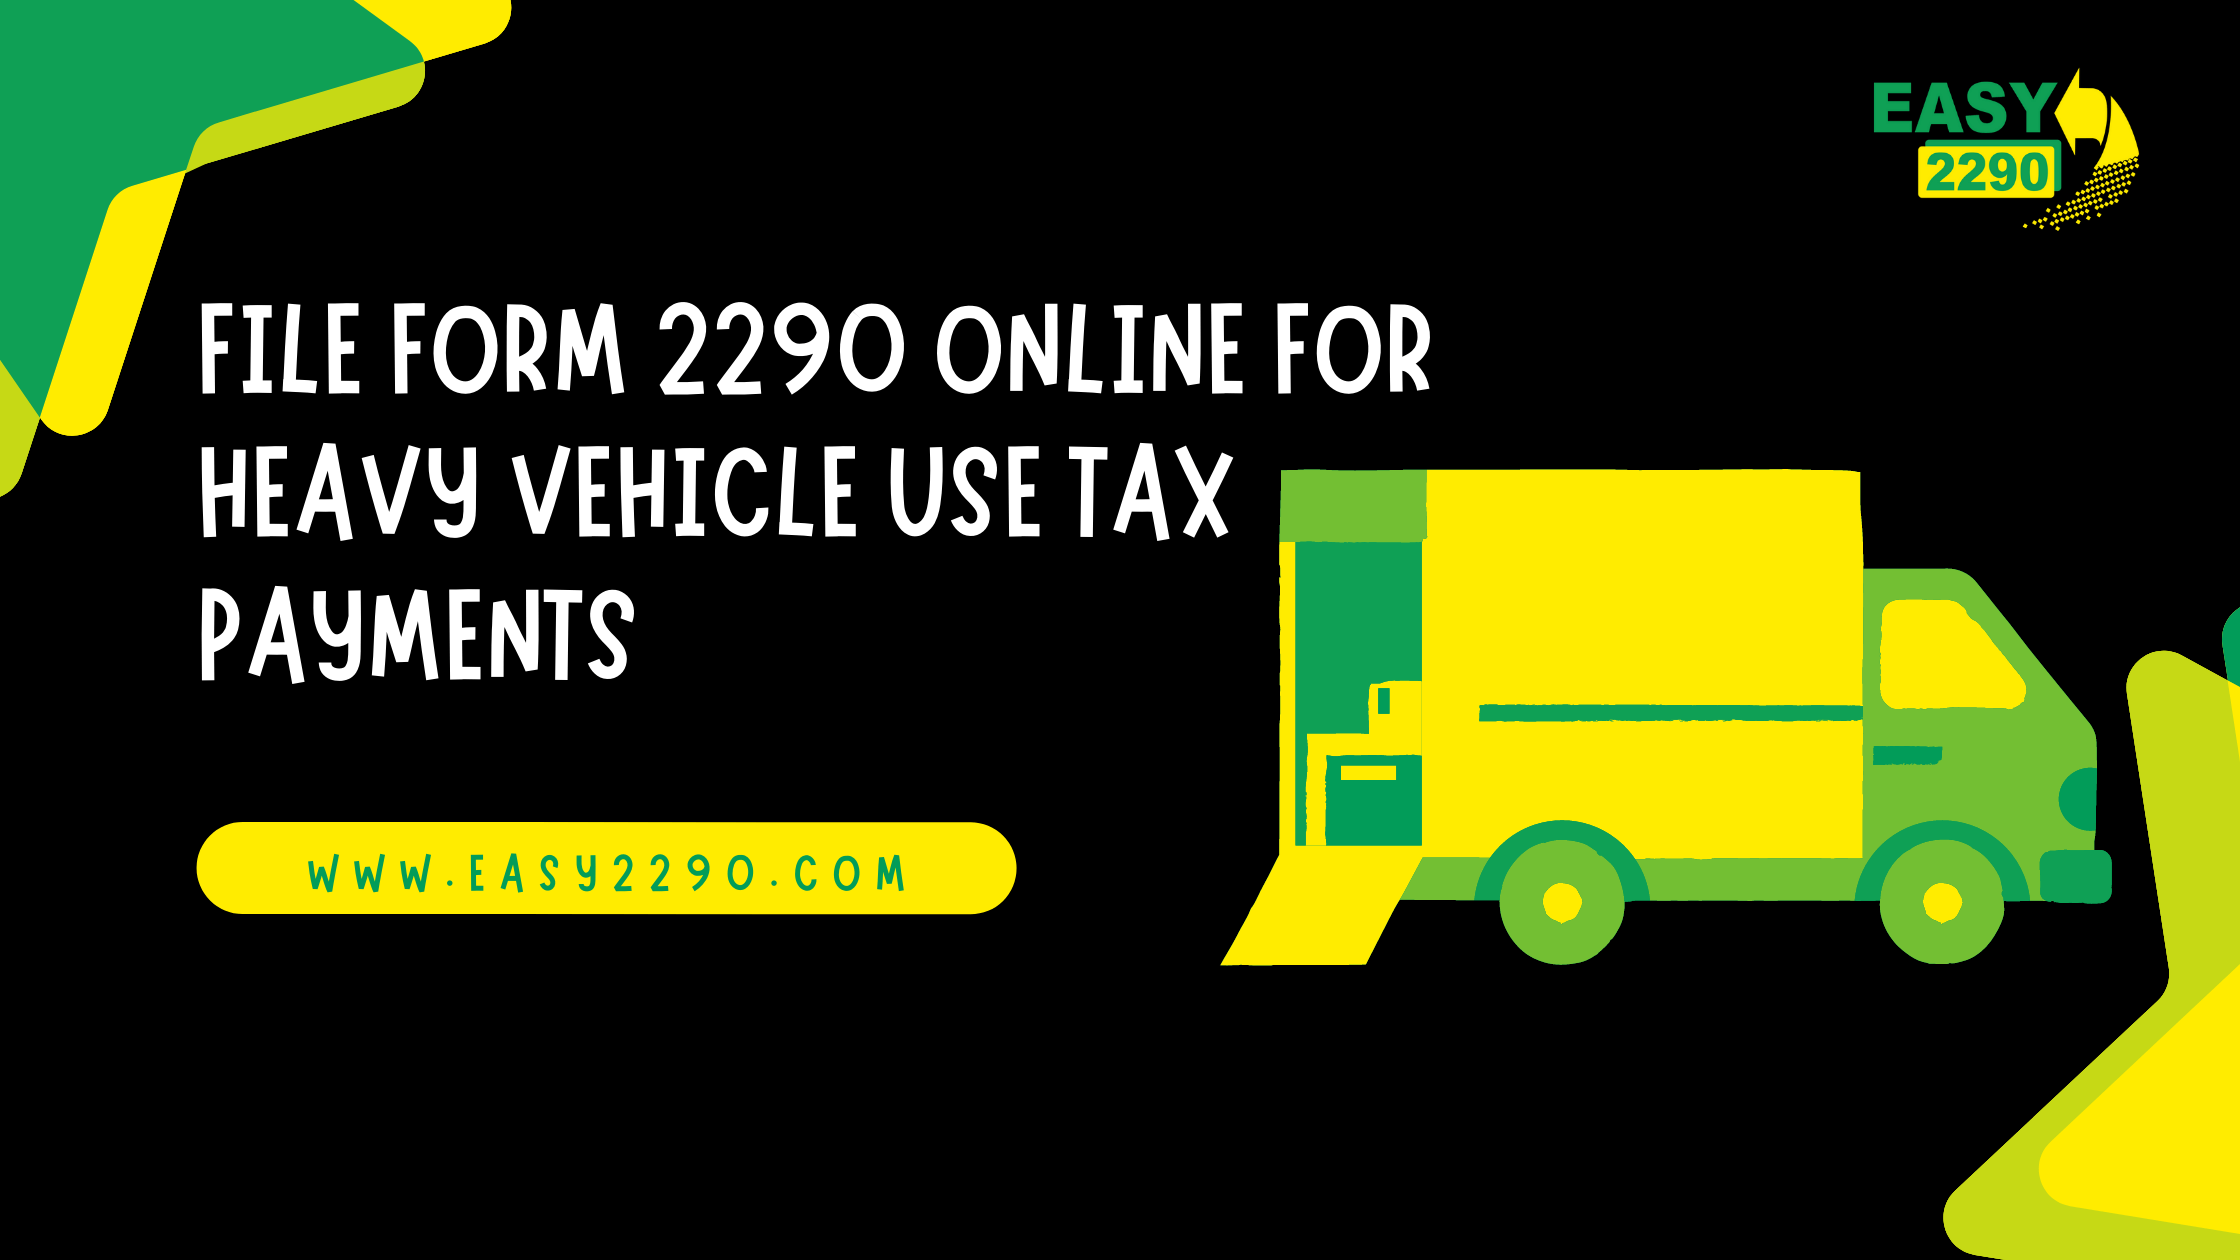 File Form 2290 Online For Heavy Vehicle Use Tax Payments